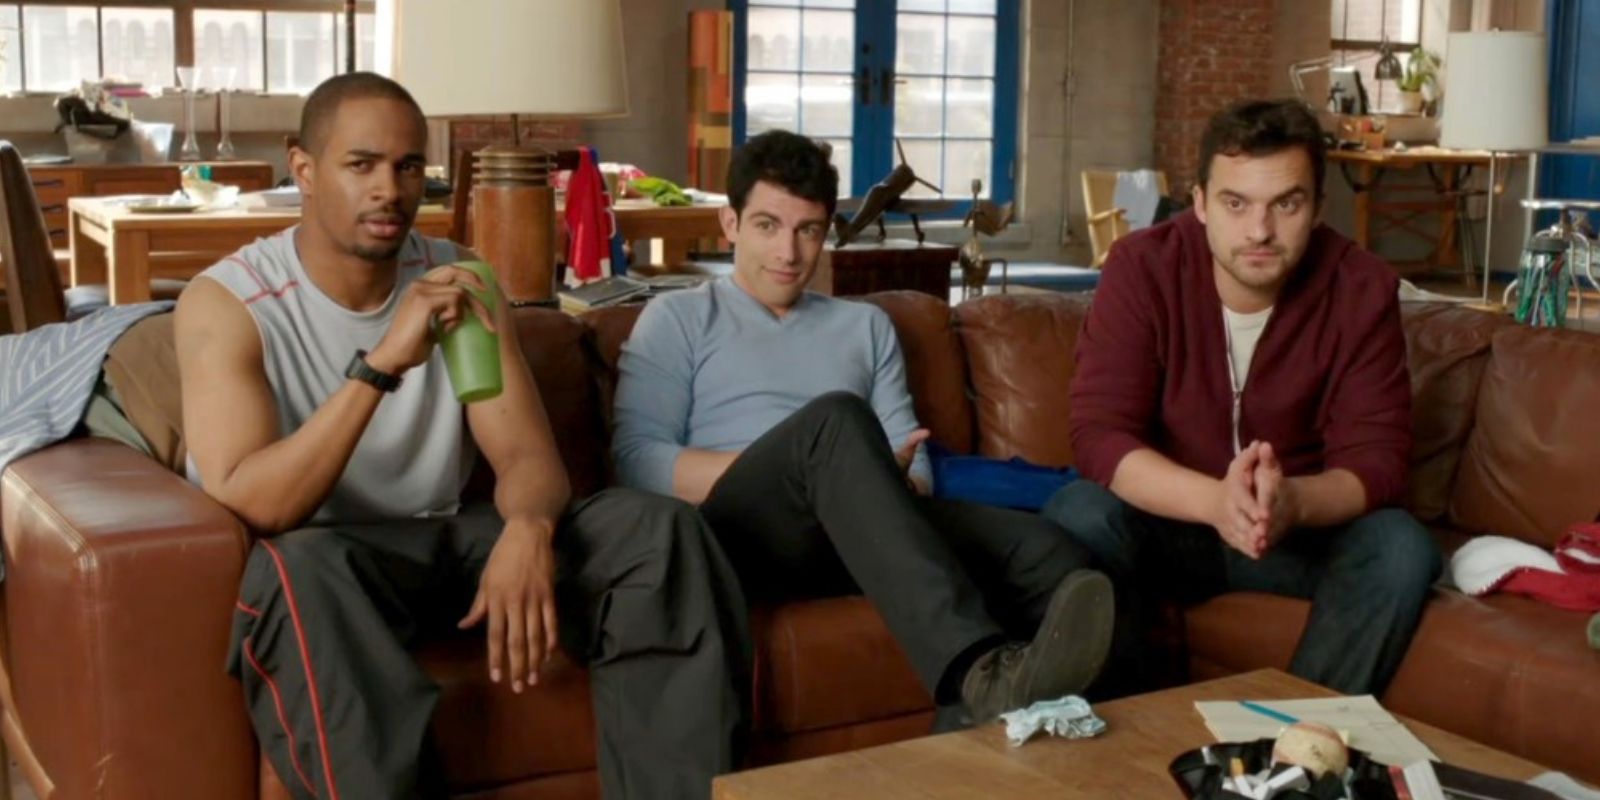 Coach (Damon Wayans Jr.), Schmidt (Max Greenfield), and Nick (Jake Johnson) in New Girl sitting on the couch on the couch in the New Girl pilot